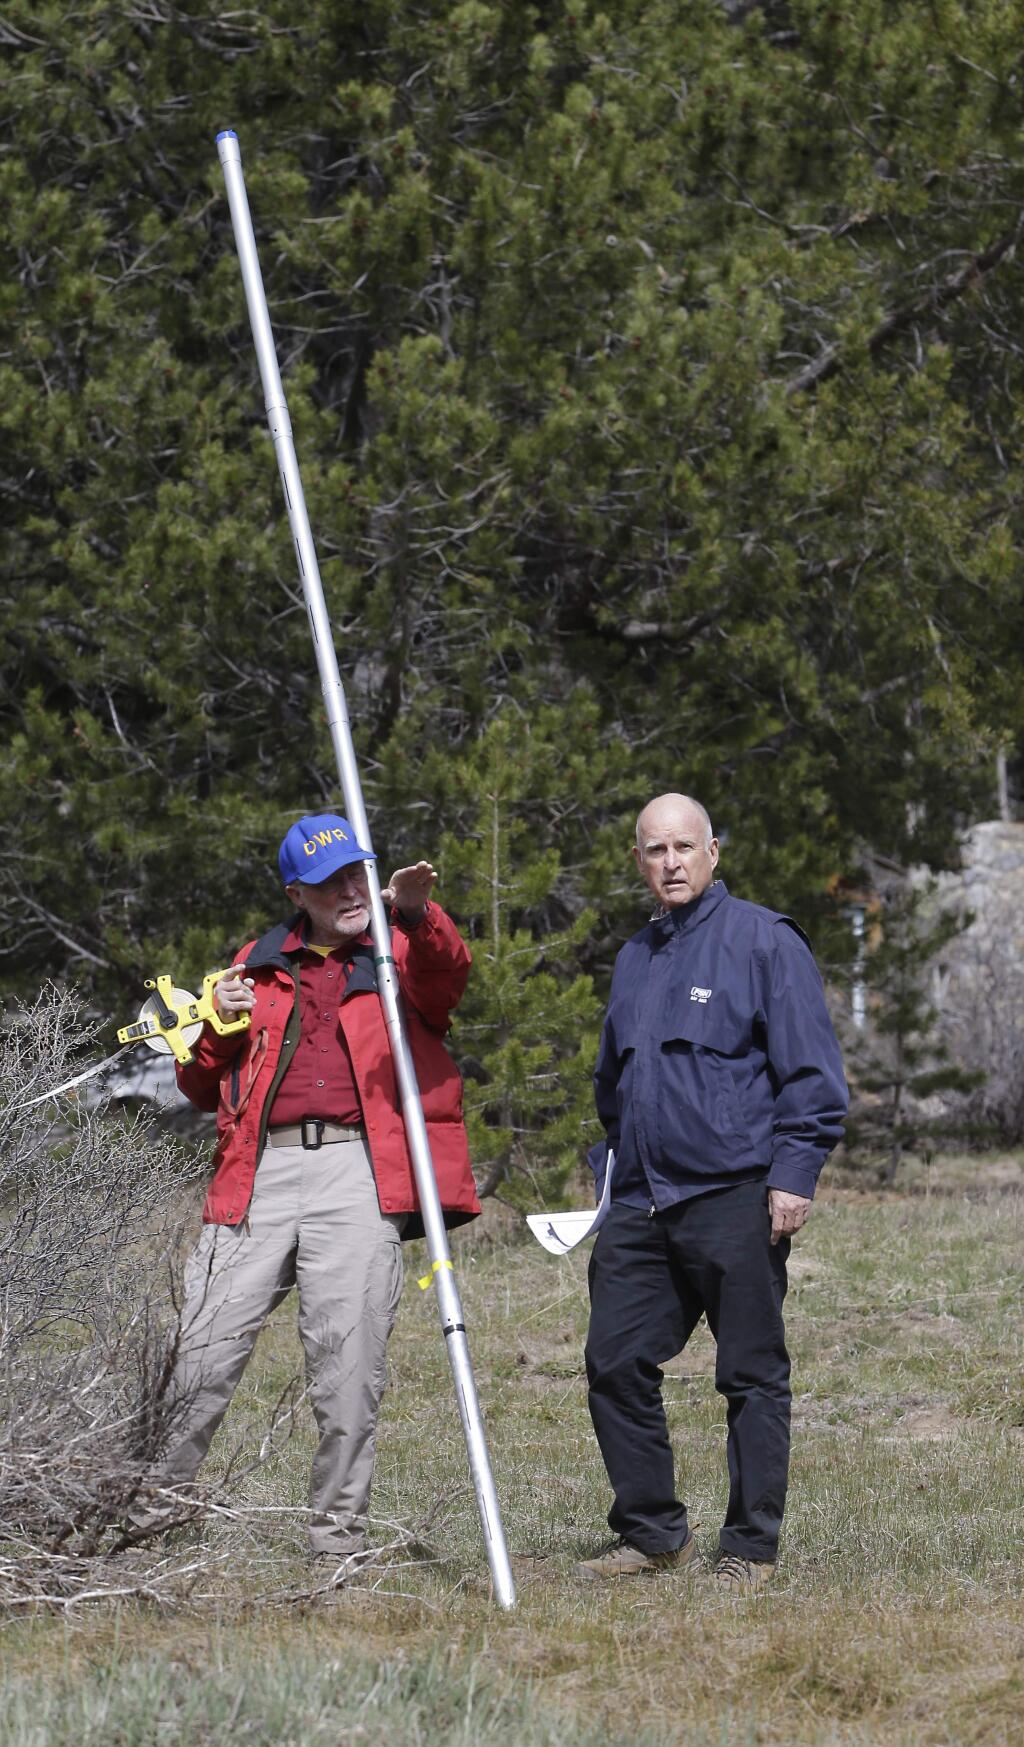 Frank Gehrke, chief of the California Cooperative Snow Surveys Program for the Department of Water Resources, explains to Gov. Jerry Brown how he normally conducts a snow survey, near Echo Summit, Calif., Wednesday, April 1, 2015. Gehrke said this was the first time since he has been conducting the survey that he found no snow at this location at this time of the year. Brown announced that he signed an executive order requiring the state water board to implement measures in cities and towns to cut water usage by 25 percent compared with 2013 levels. (AP Photo/Rich Pedroncelli)